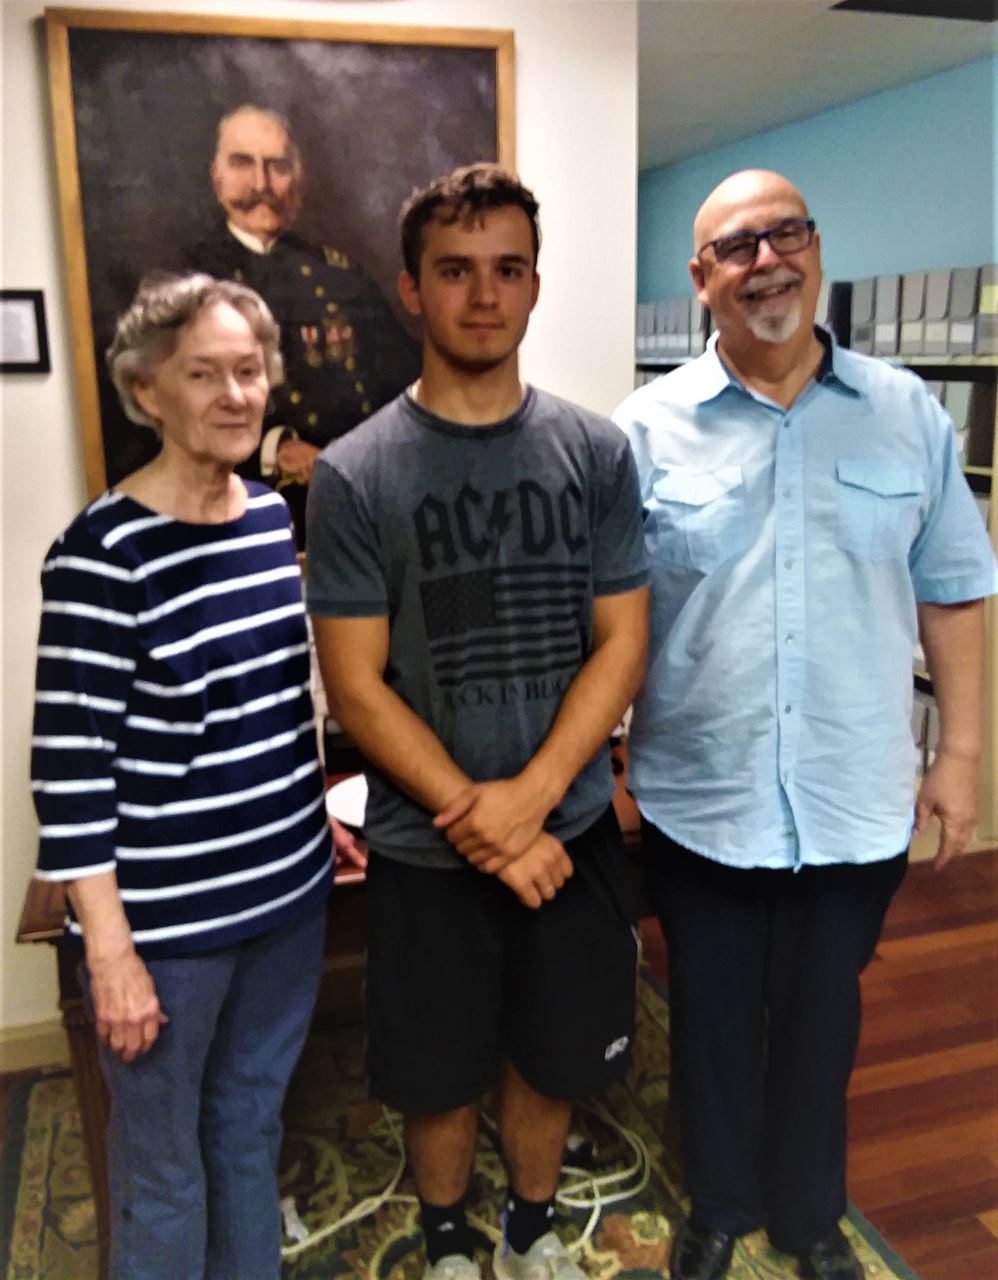 Curator, Mary Frazier stands with Intern, Maximilian Wagner and Supervisory Director, Robert Harris